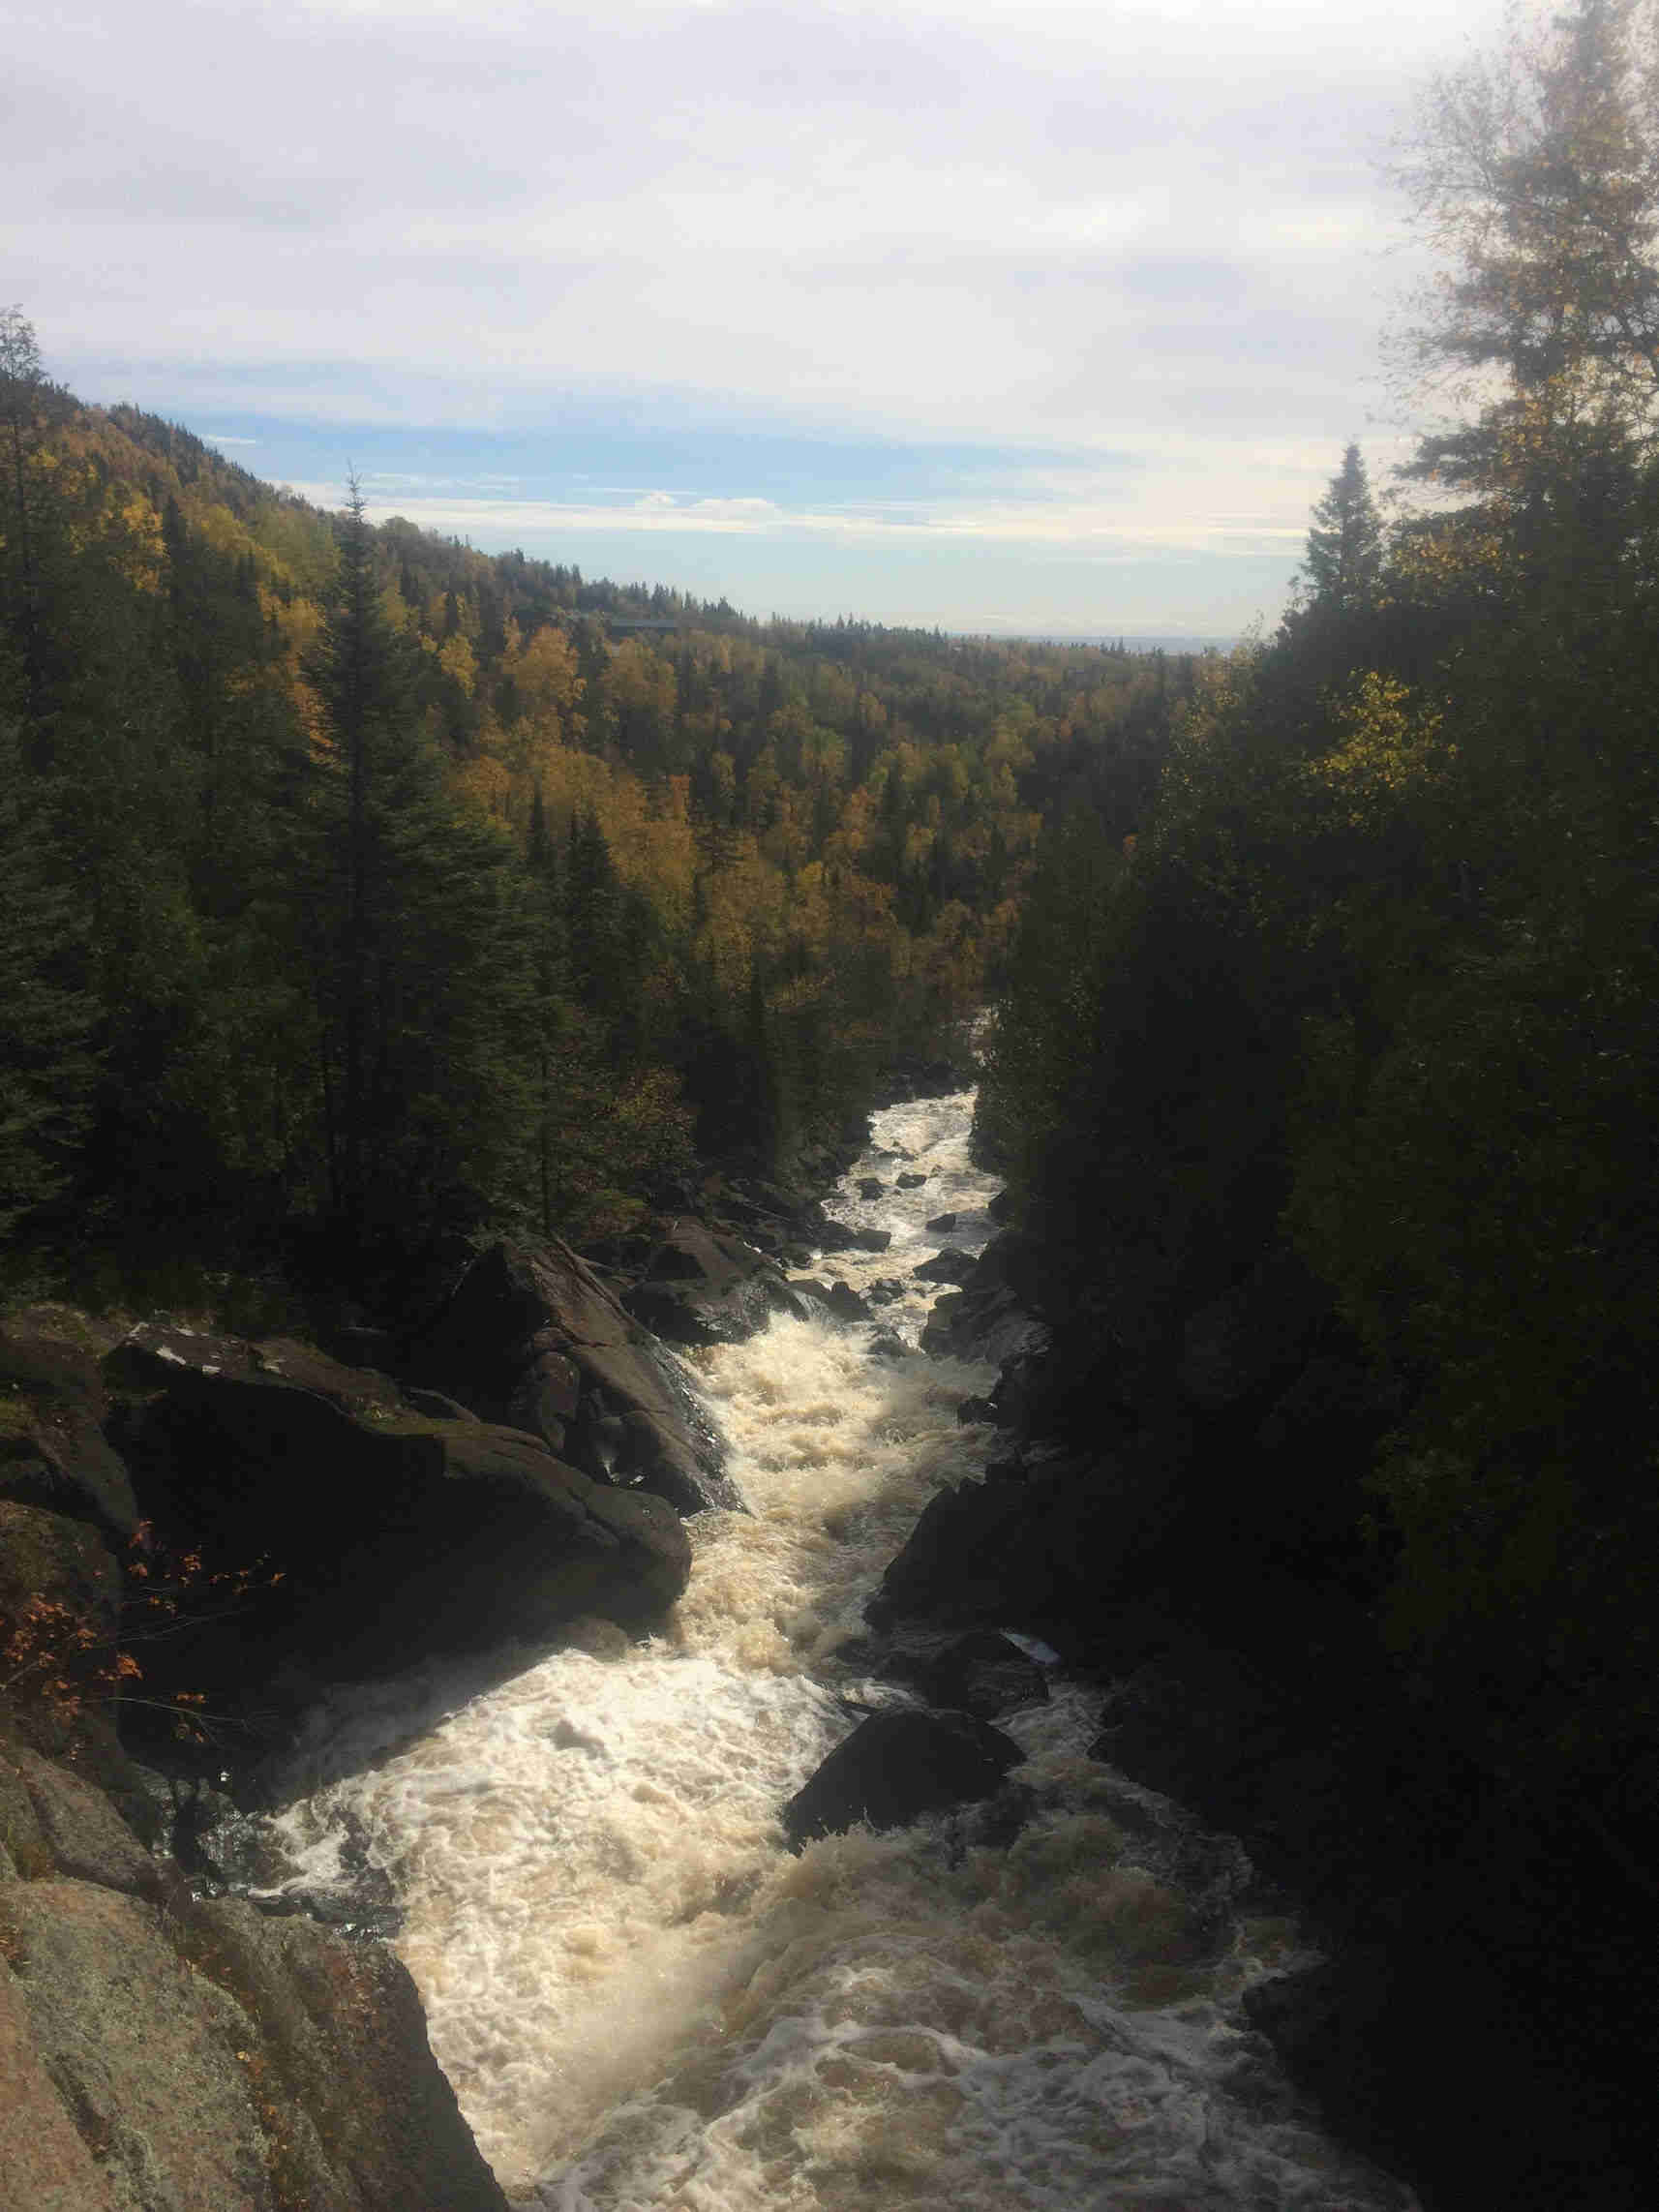 A raging river flowing down a gorge in the Superior National Forest